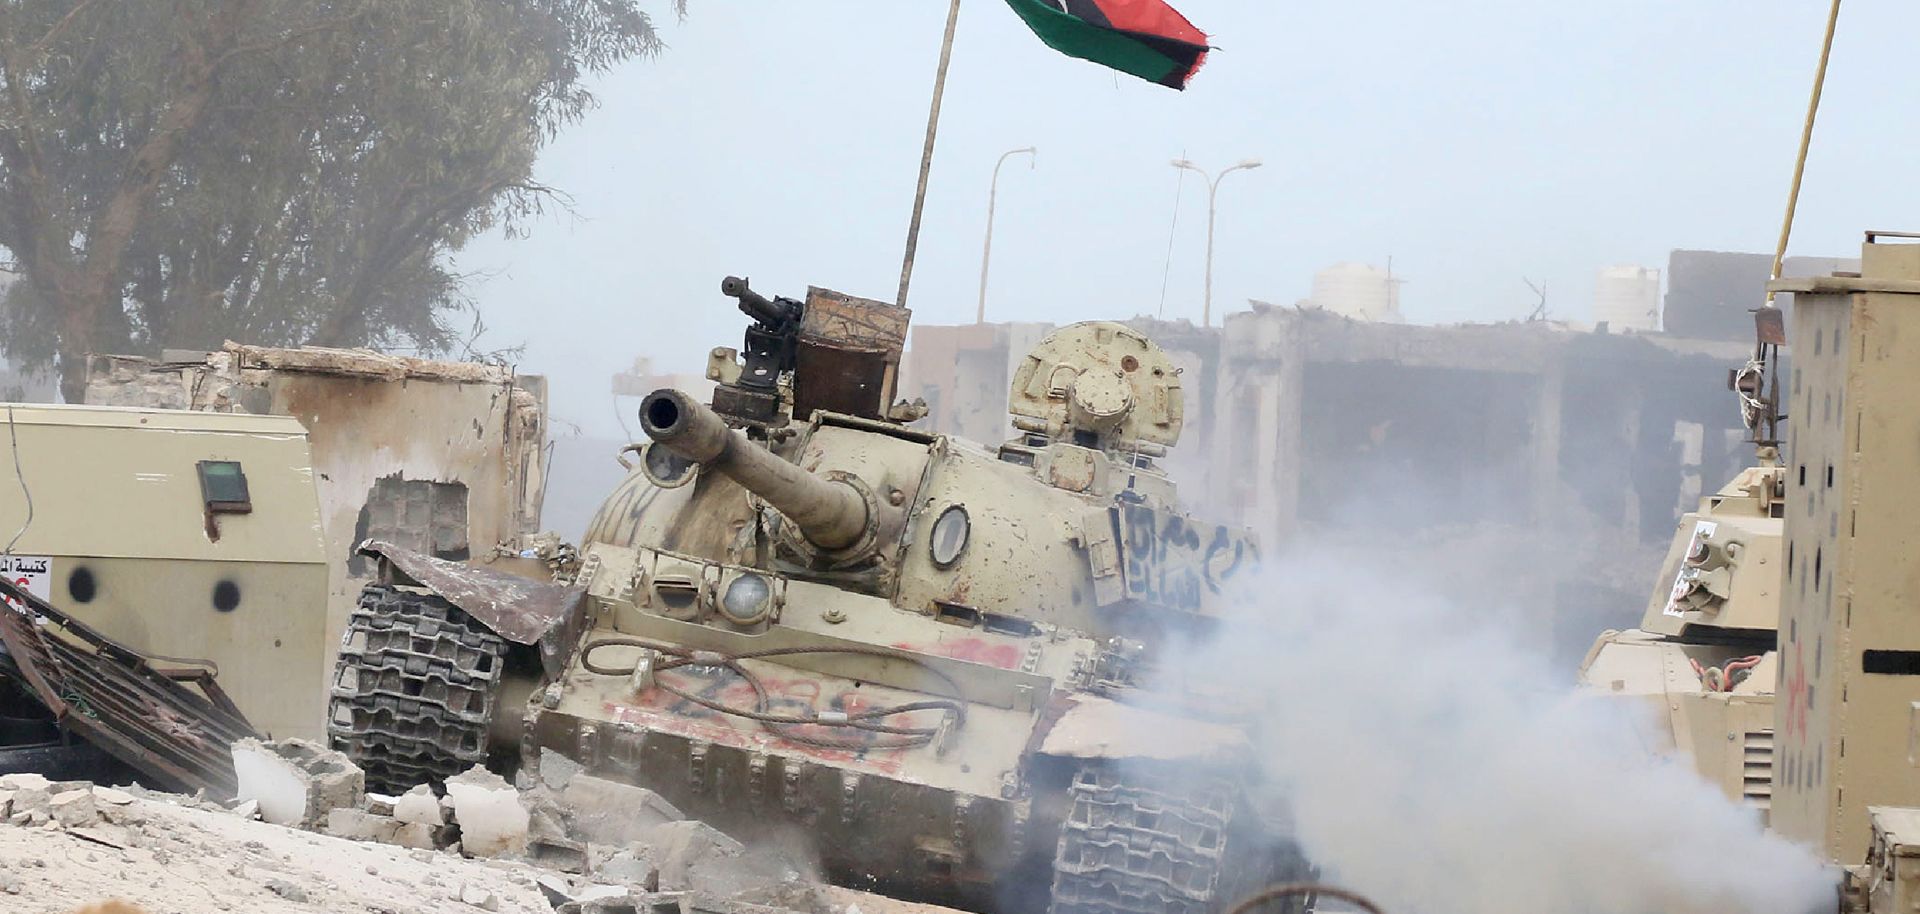 A T-54 tank belonging to forces loyal to Libya's Government of National Accord (GNA) takes position in Sirte's Al-Giza Al-Bahriya district on November 21, 2016, during clashes with Islamic State (IS) group jihadists to retake control of the Mediterranean coastal city.